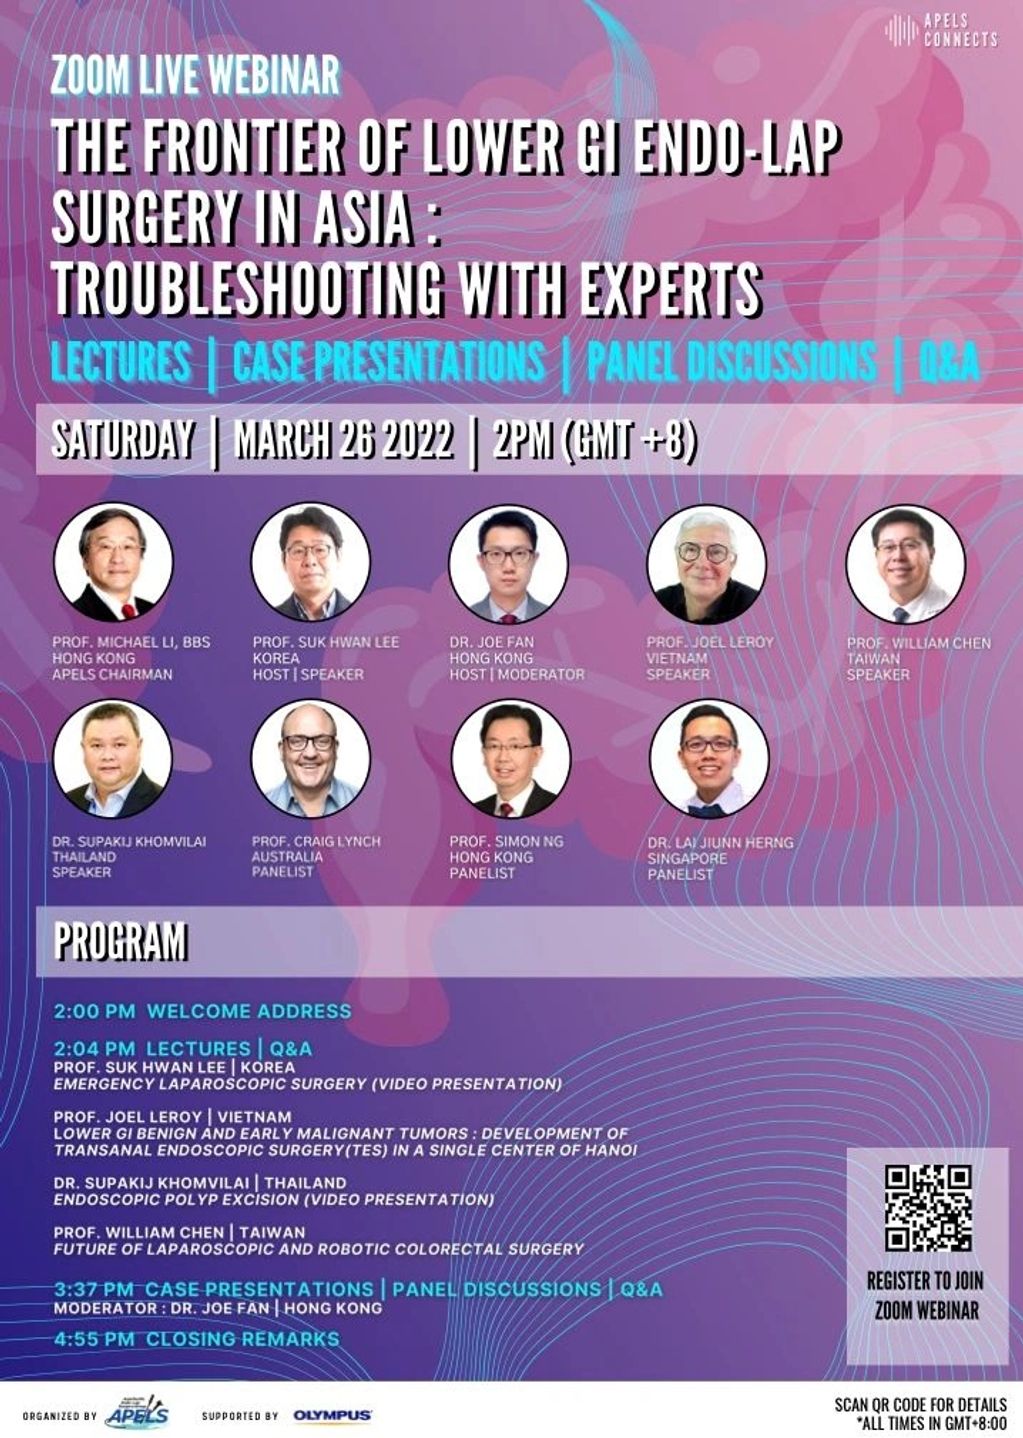 THE FRONTIER OF LOWER GI ENDO-LAP SURGERY IN ASIA: TROUBLESHOOTING WITH EXPERTS